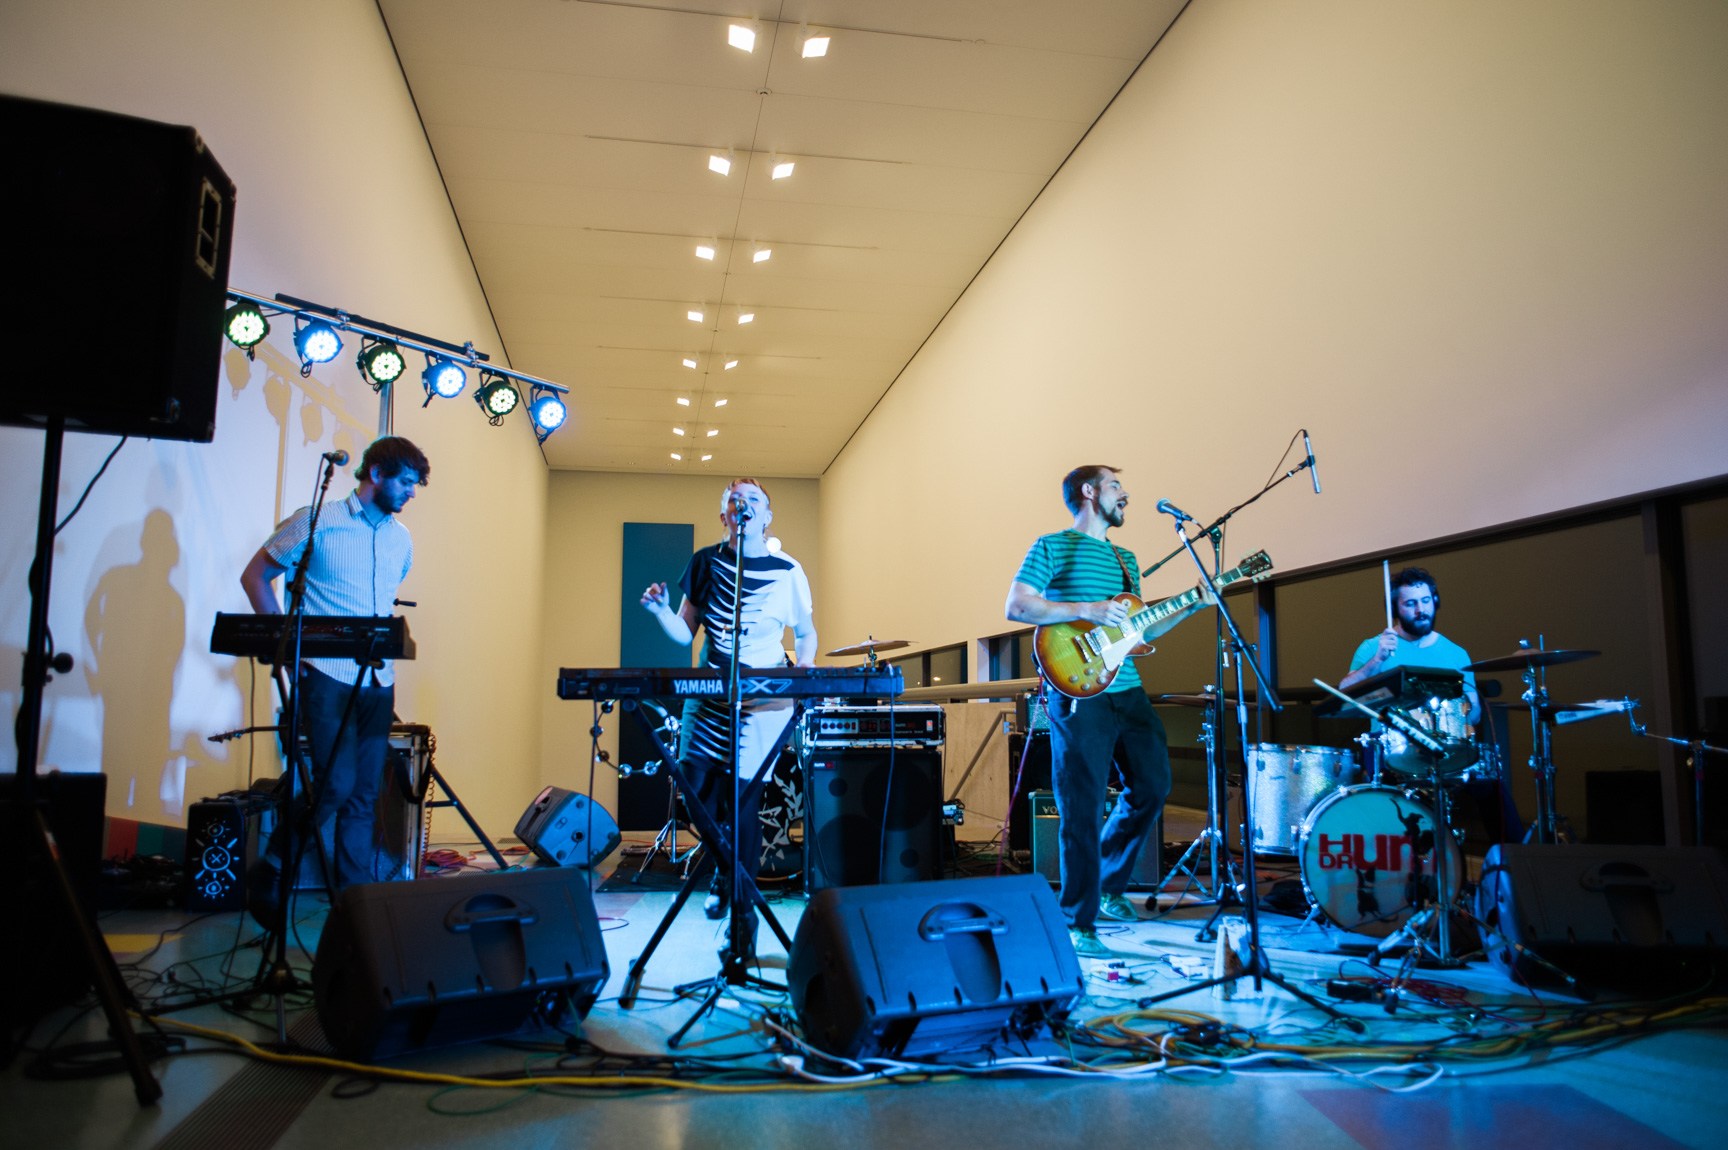 The band Née performs in the Main Gallery.